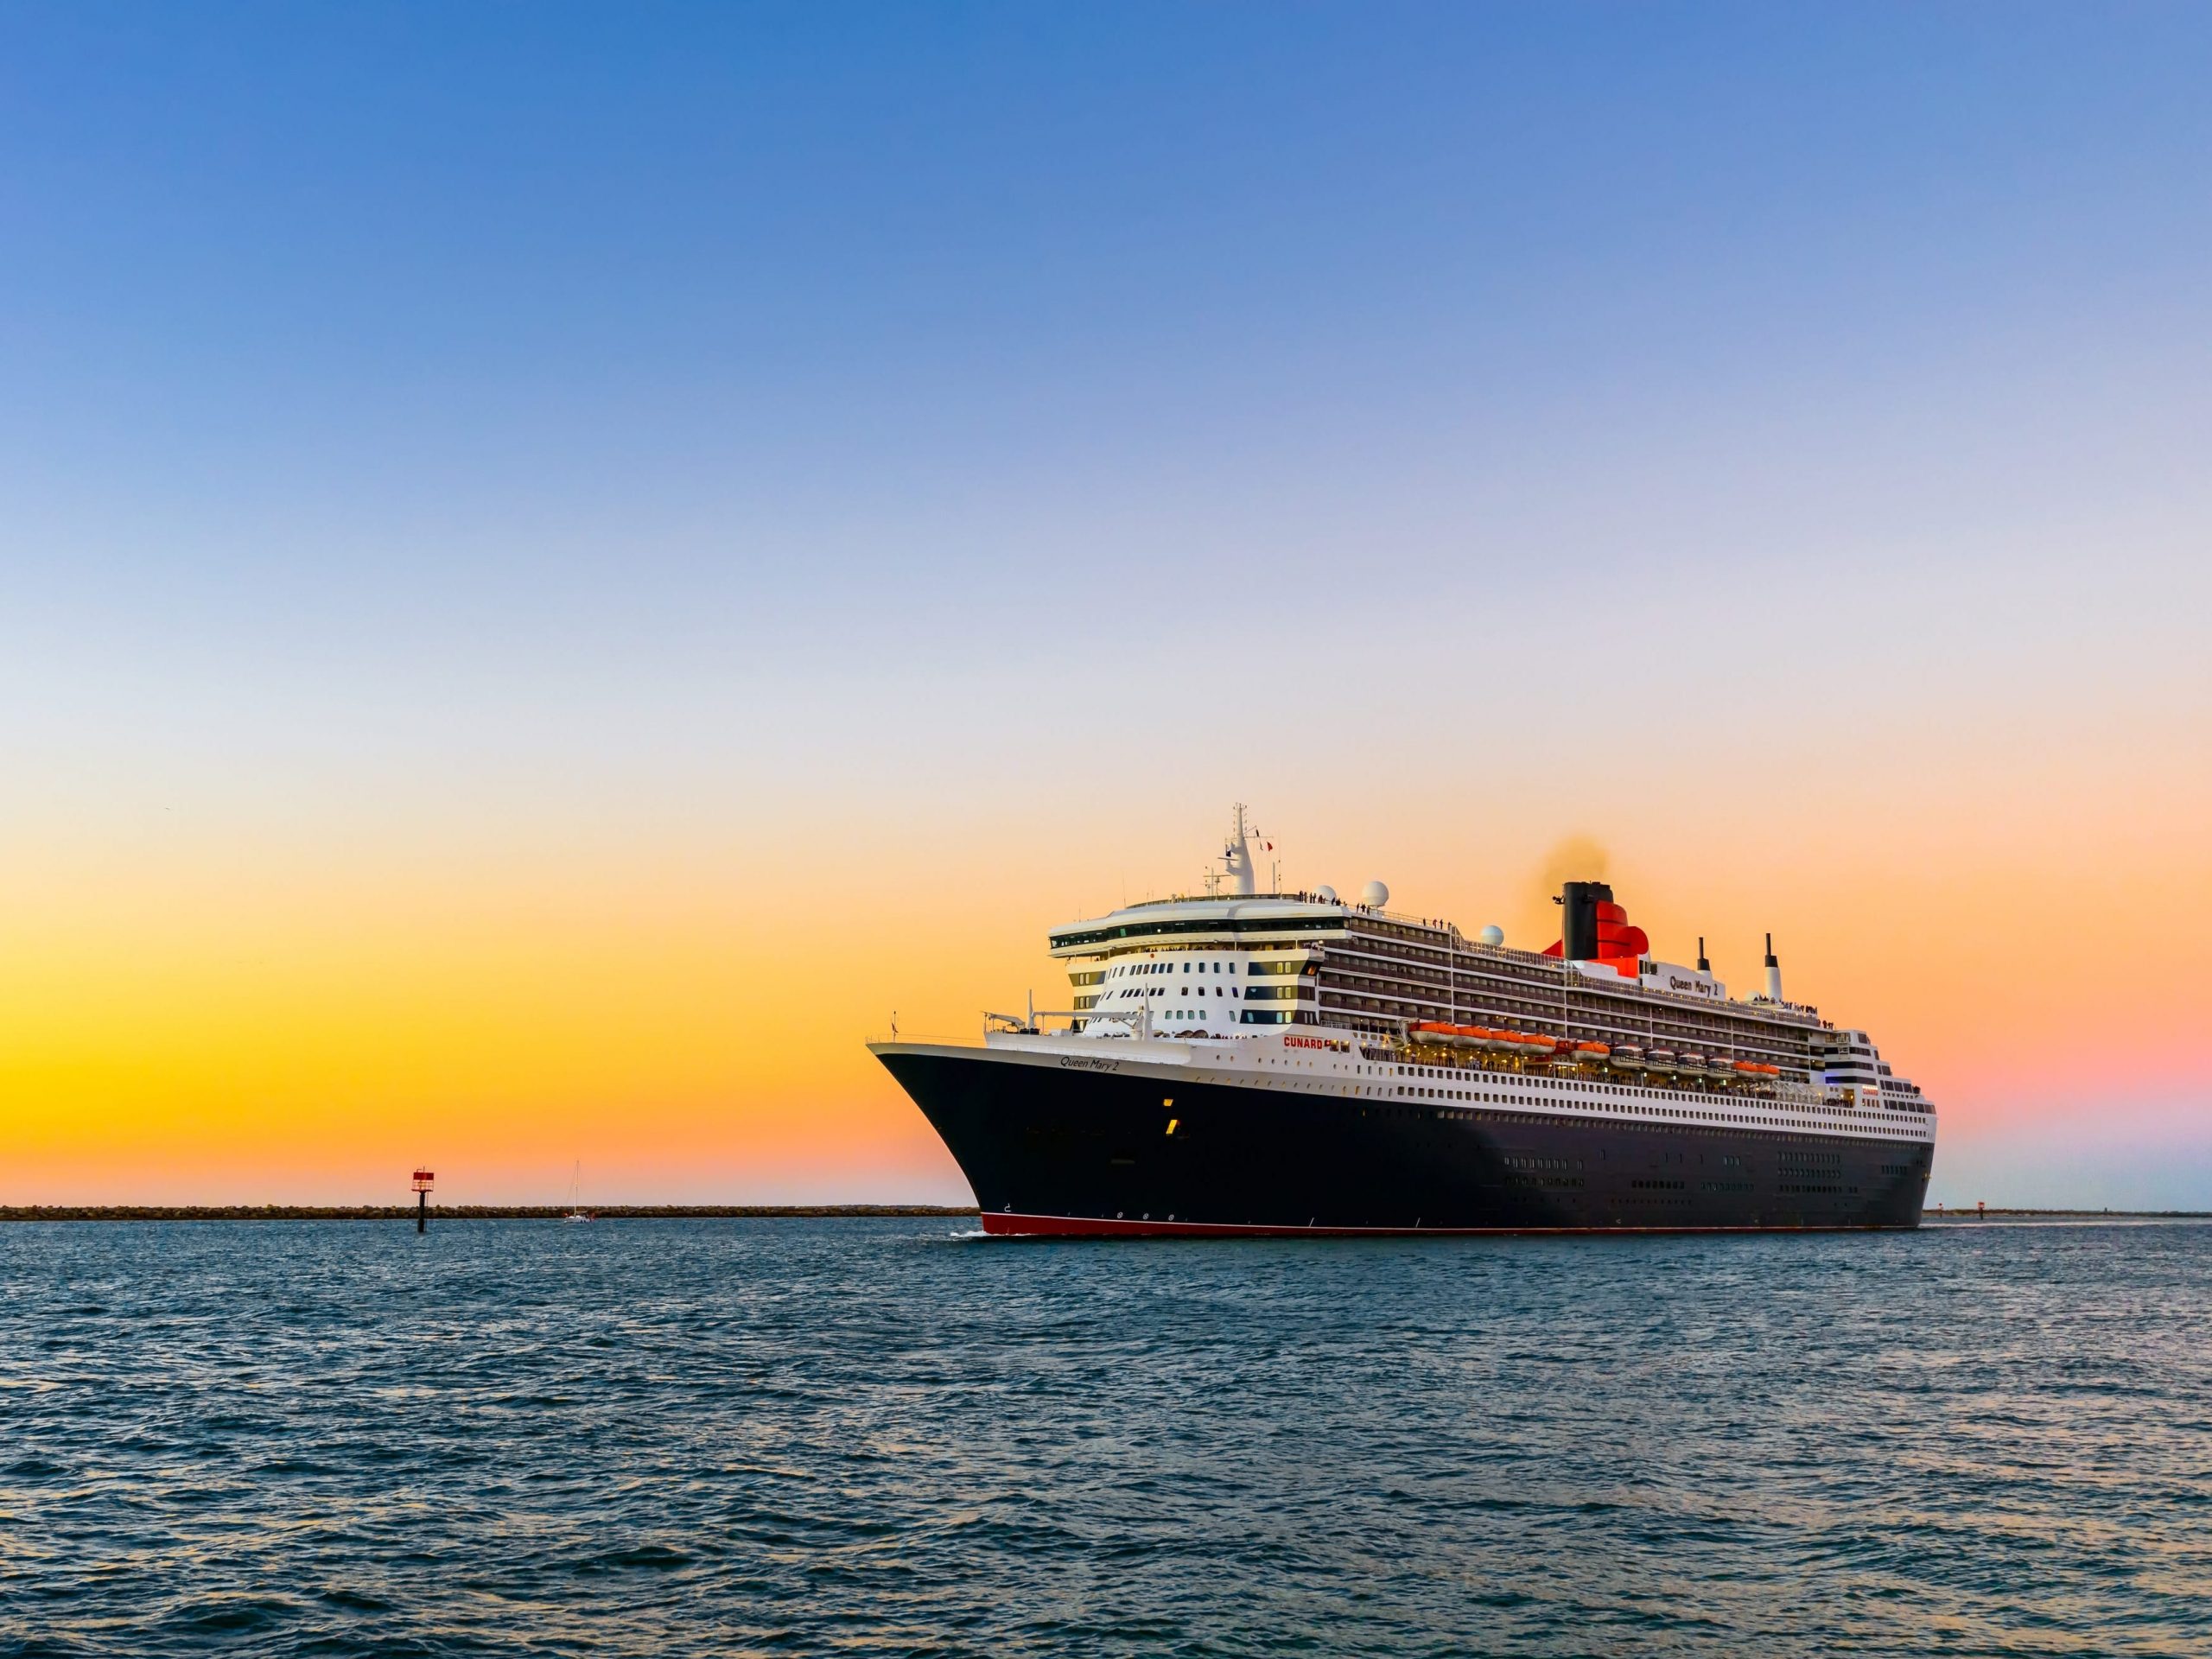 The Queen Mary 2 cruise ship will travel to 16 countries around the world in 2022.